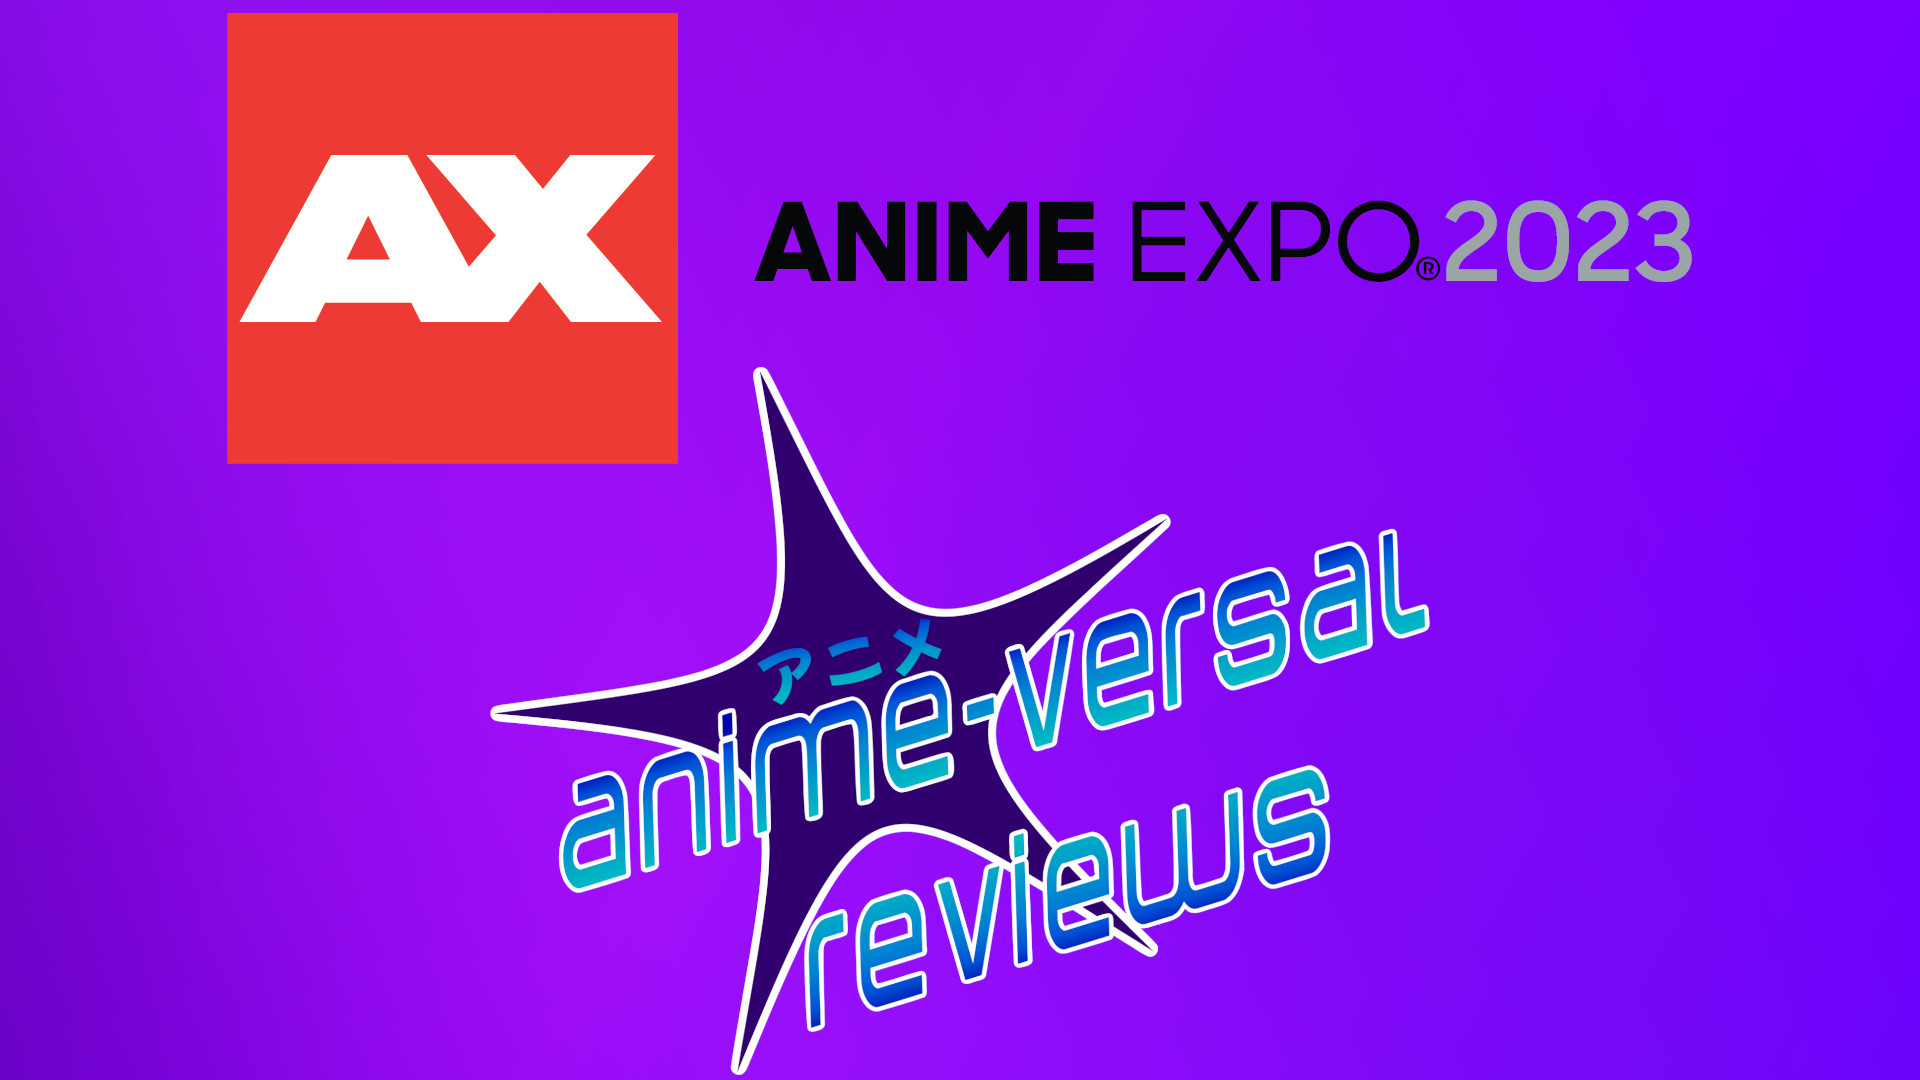 ANIME EXPO 2023: AVR To Host Panel On Anime’s Influence/Potential On Raising Kids